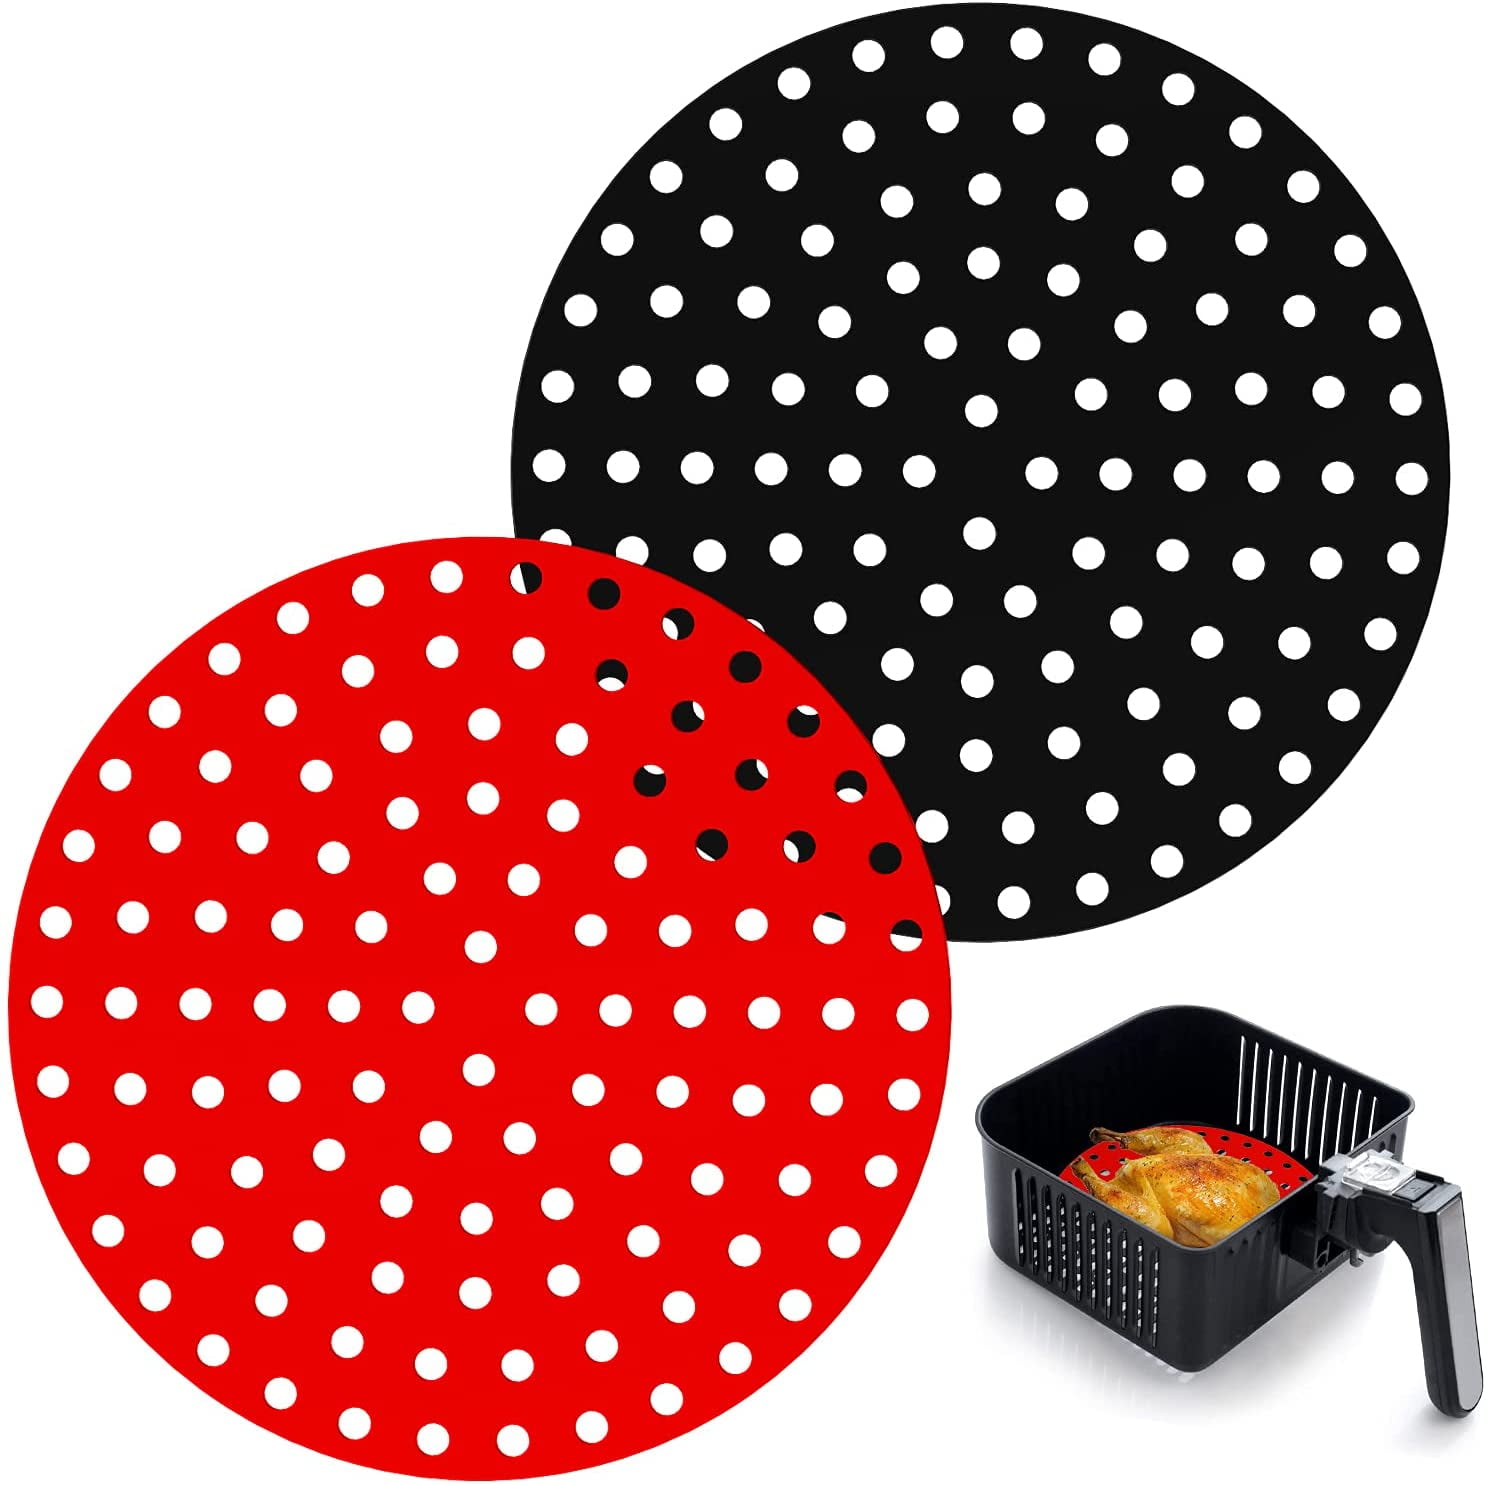 NOGIS Air Fryer Oven Basket - Replacement Air Fry Basket for Ninja